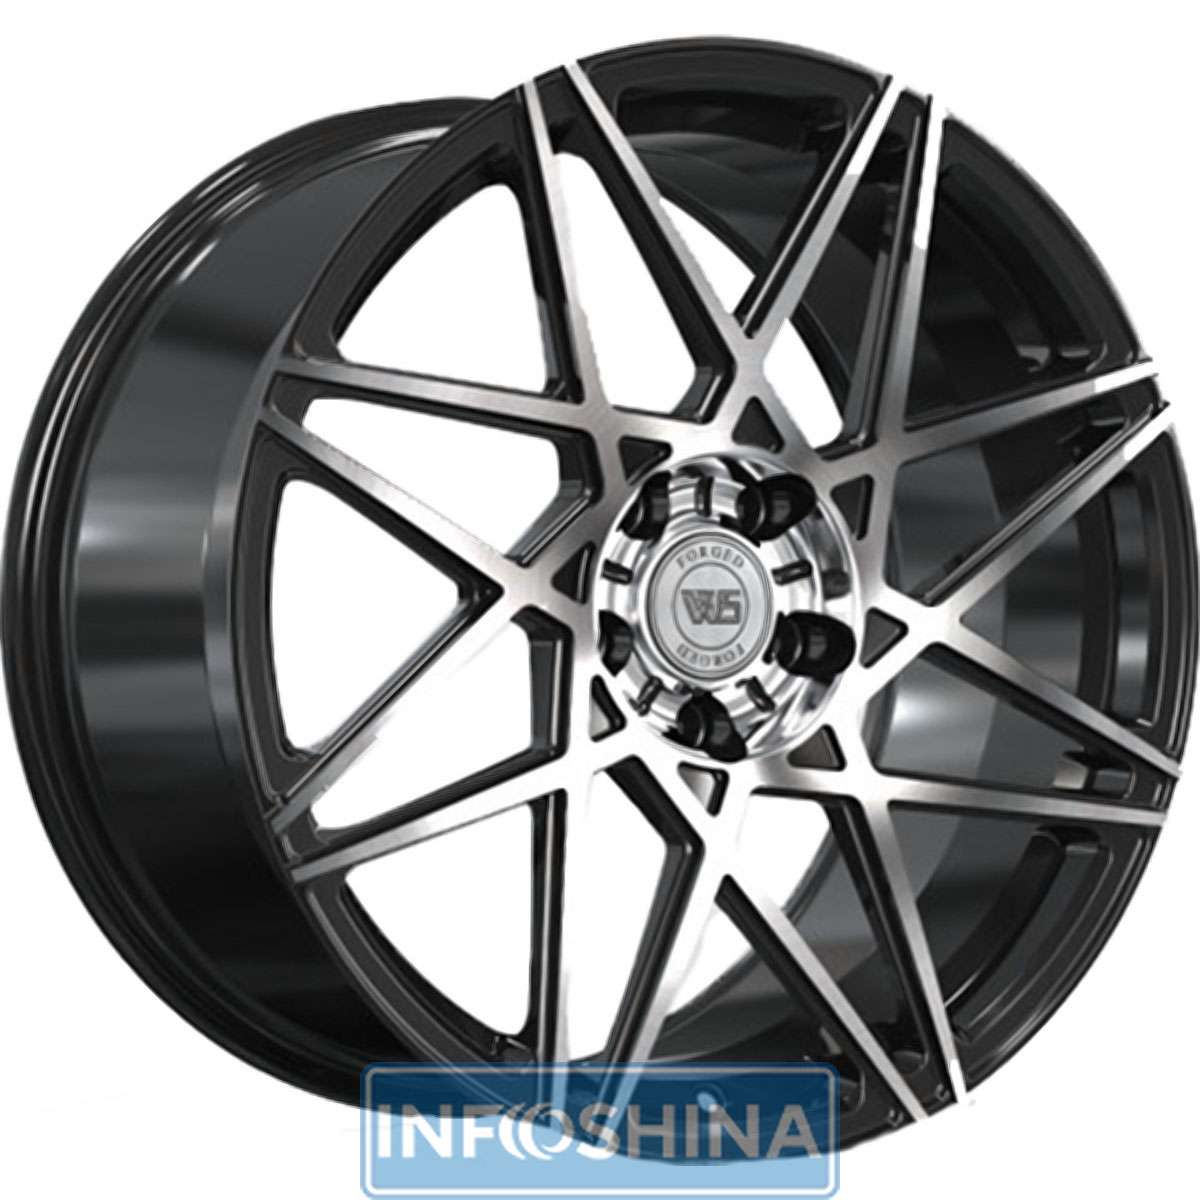 Купить диски WS Forged WS2107 Gloss Black With Machined Face R19 W9.5 PCD5x114.3 ET52.5 DIA70.5